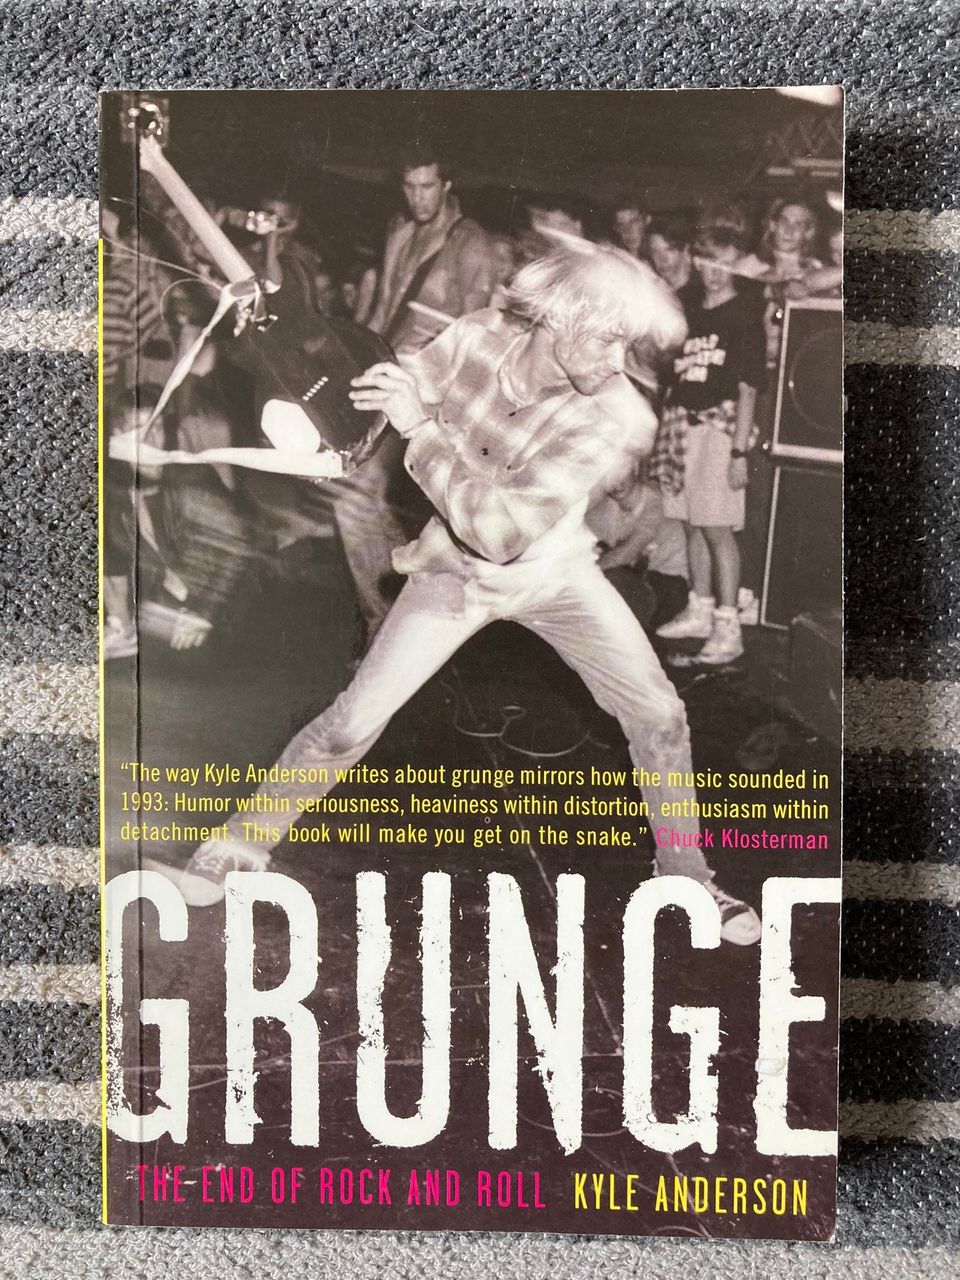 Kirja, Grunge, the end of rock and roll, Kyle Anderson